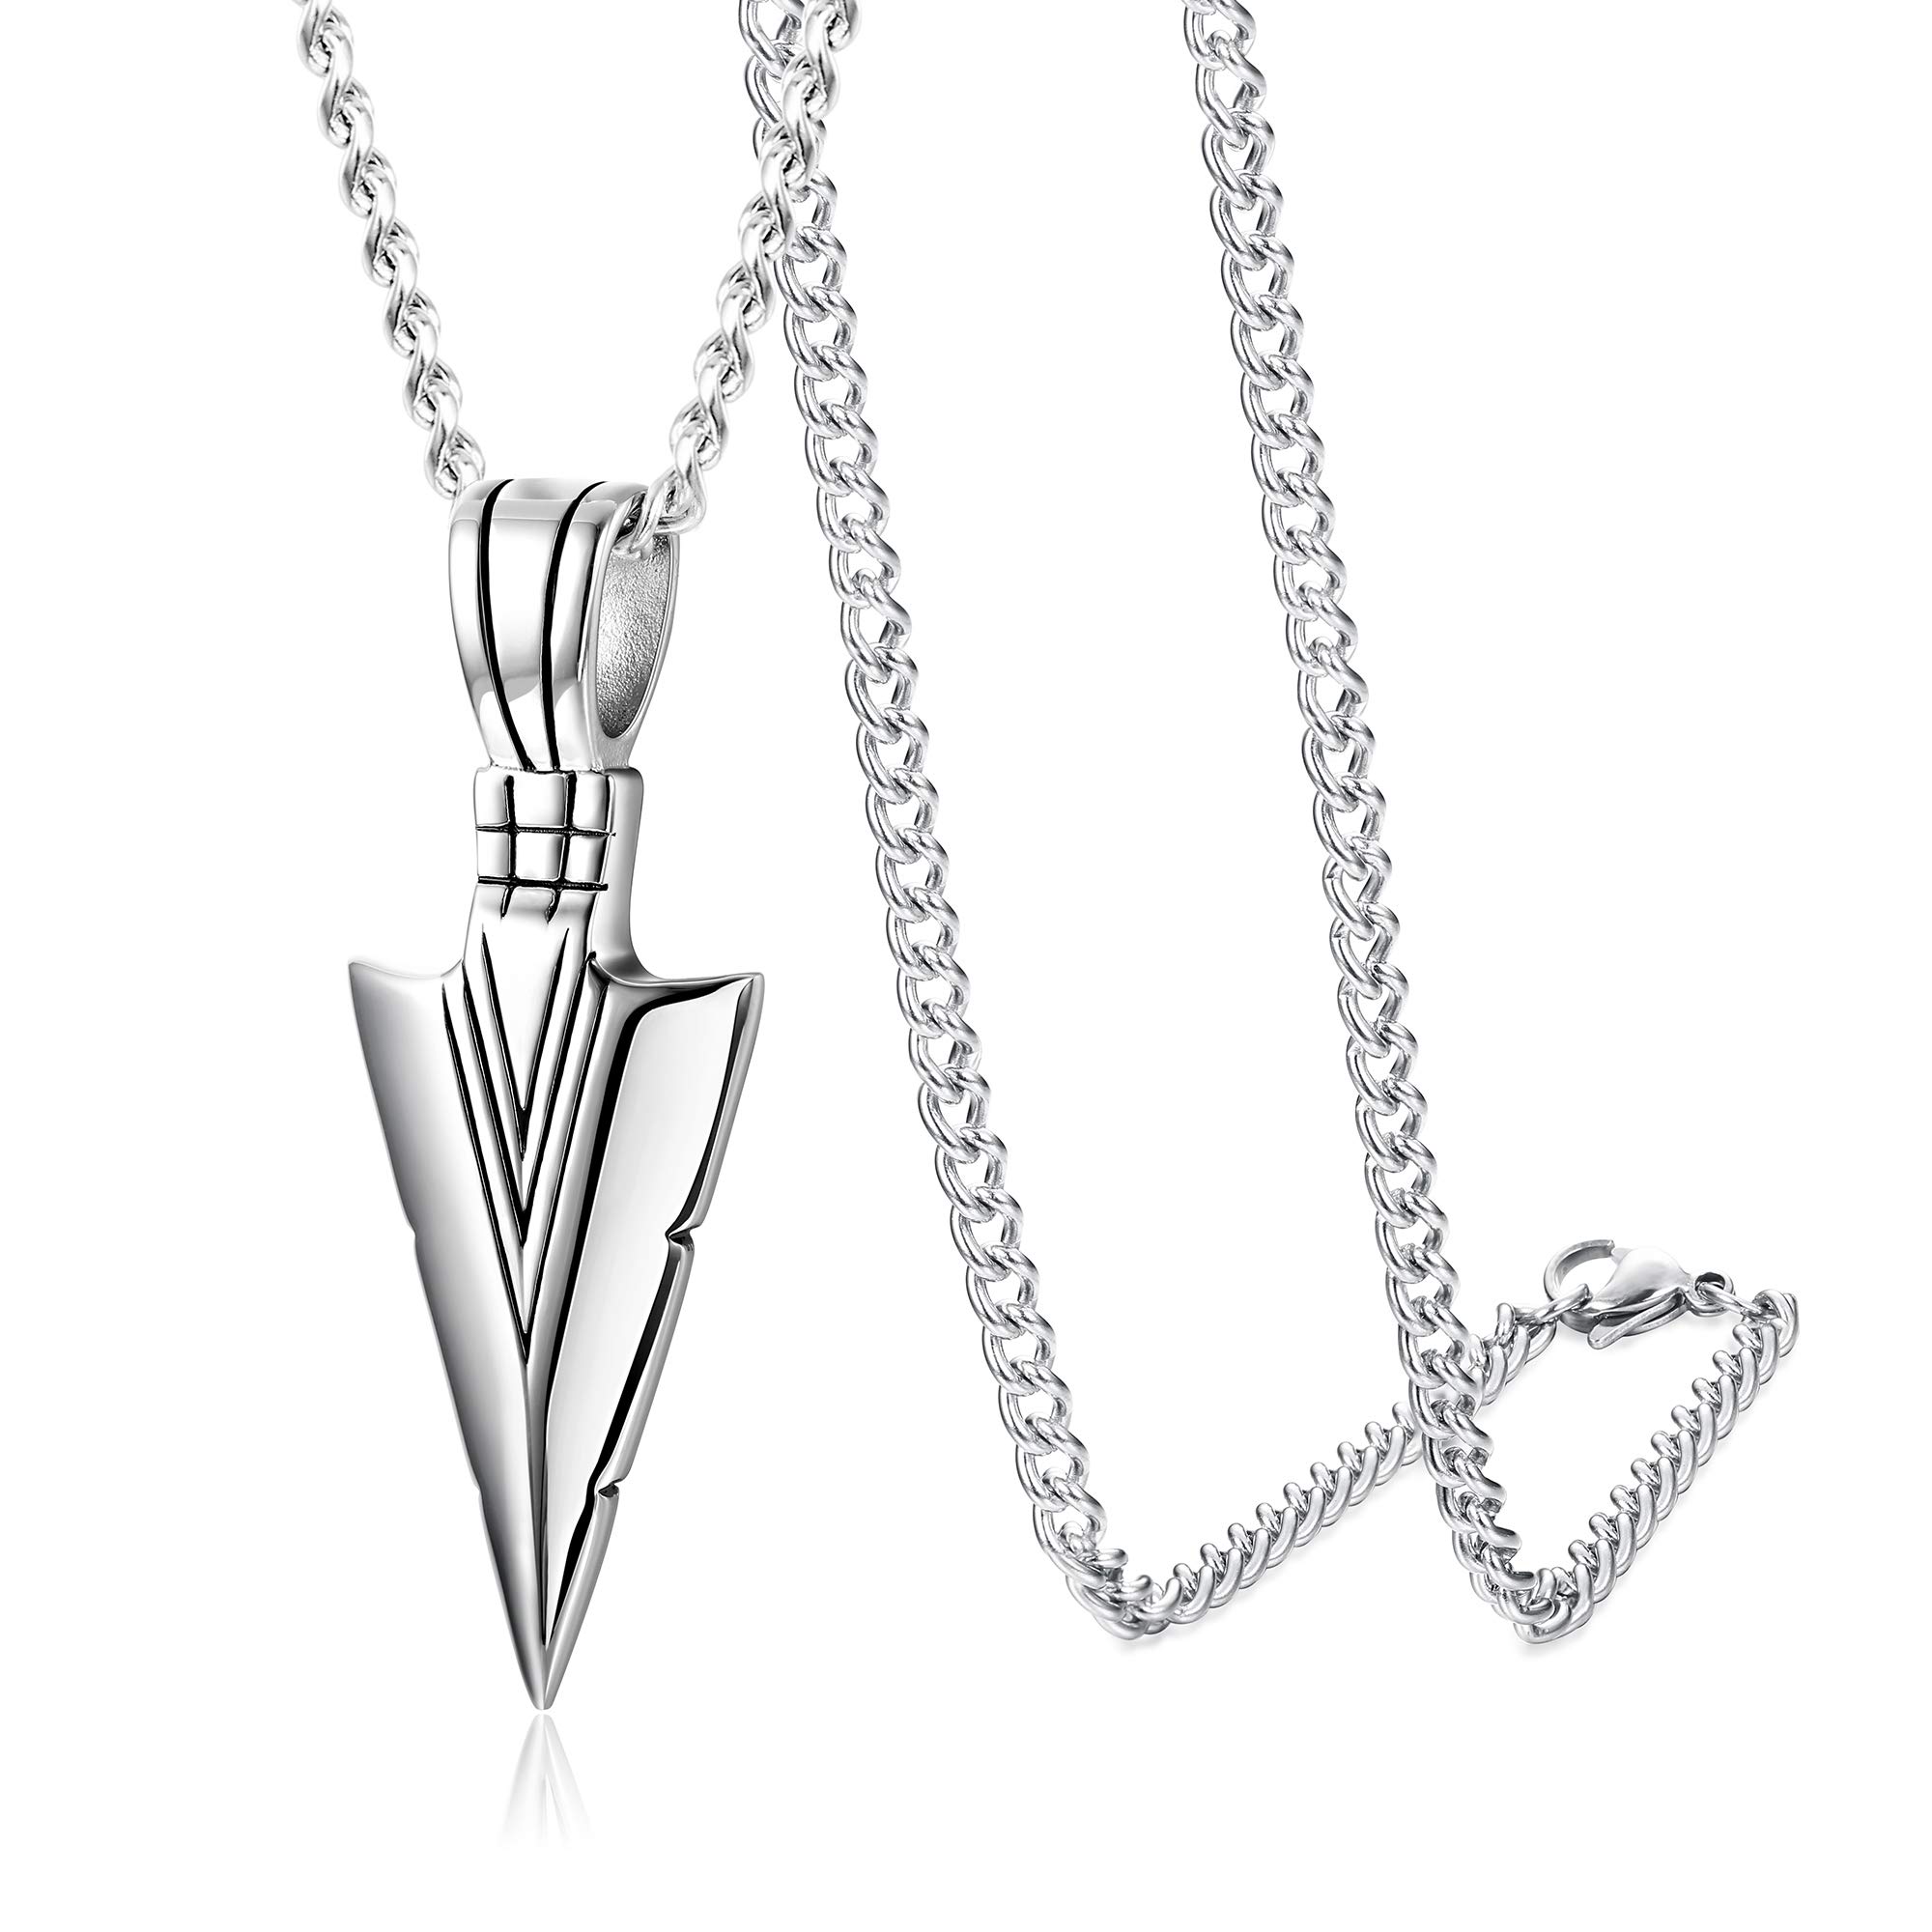 Jstyle Stainless Steel Pendant Necklace For Mens Cool Spearpoint Arrowhead Pendant Chain Necklace Set Black & Silver Tone